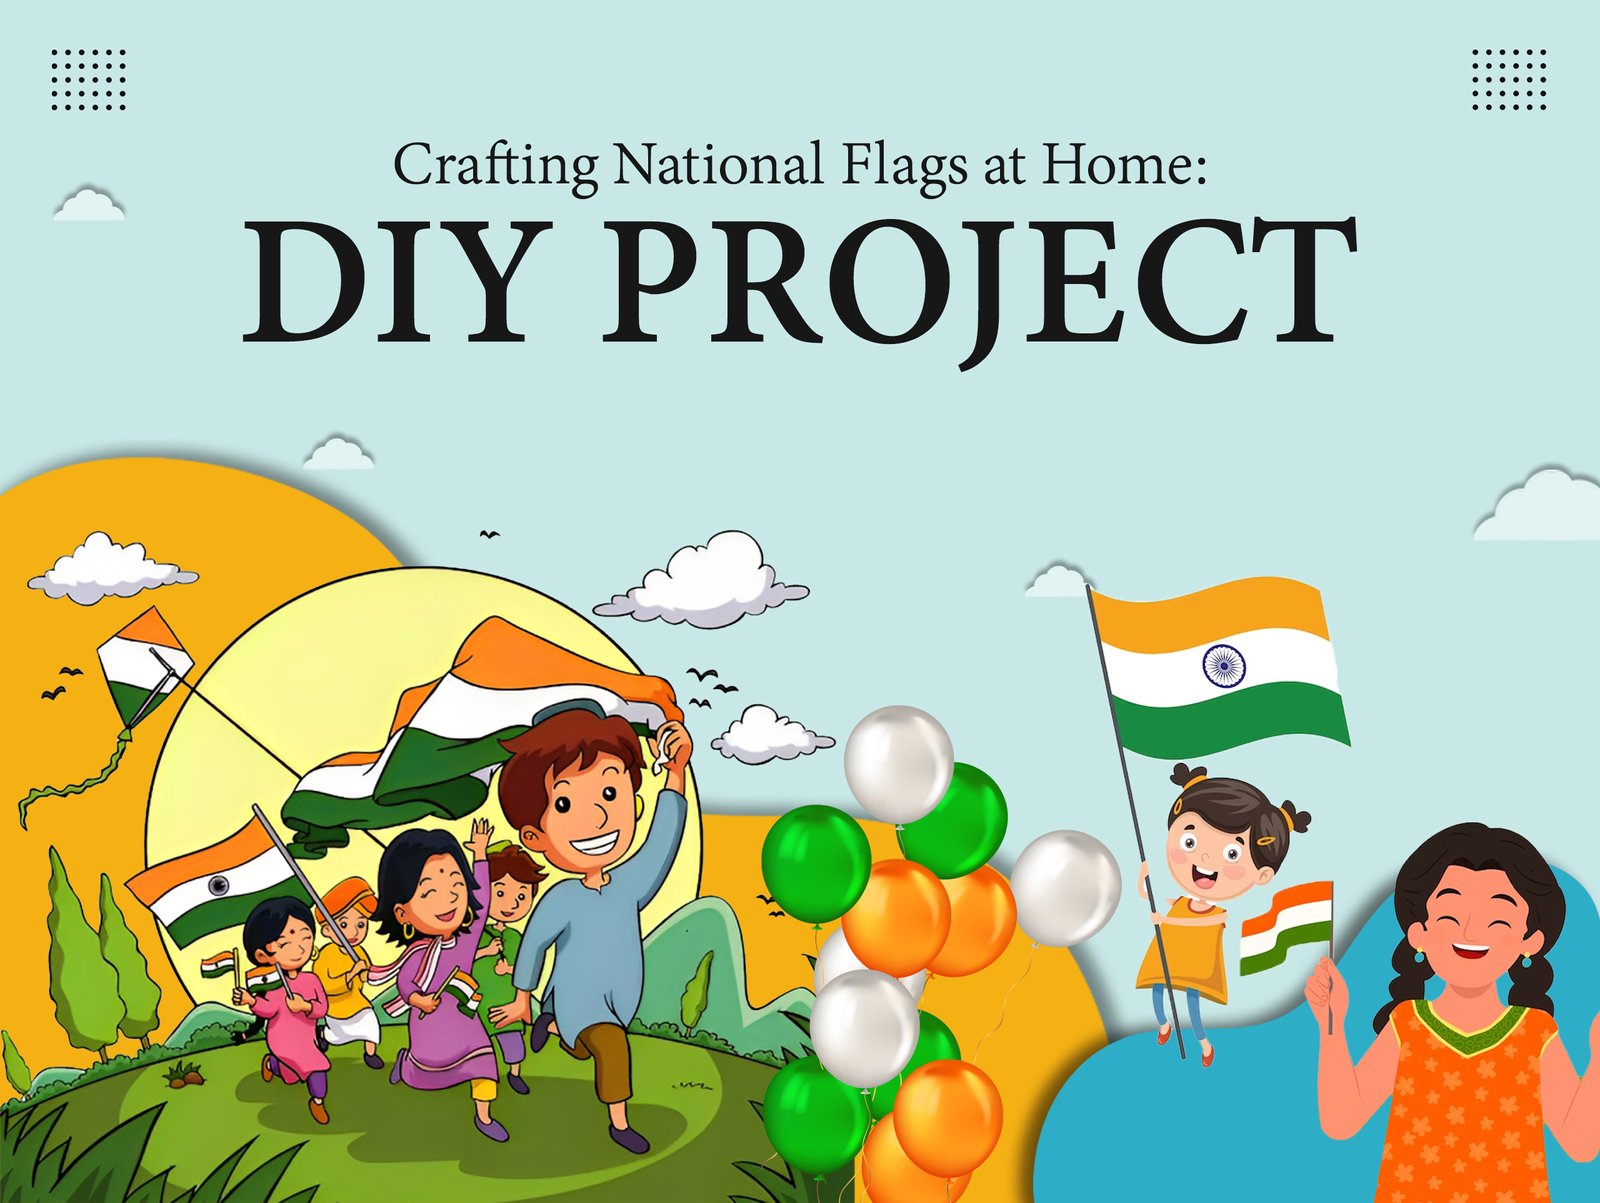 Crafting National flags at home posters